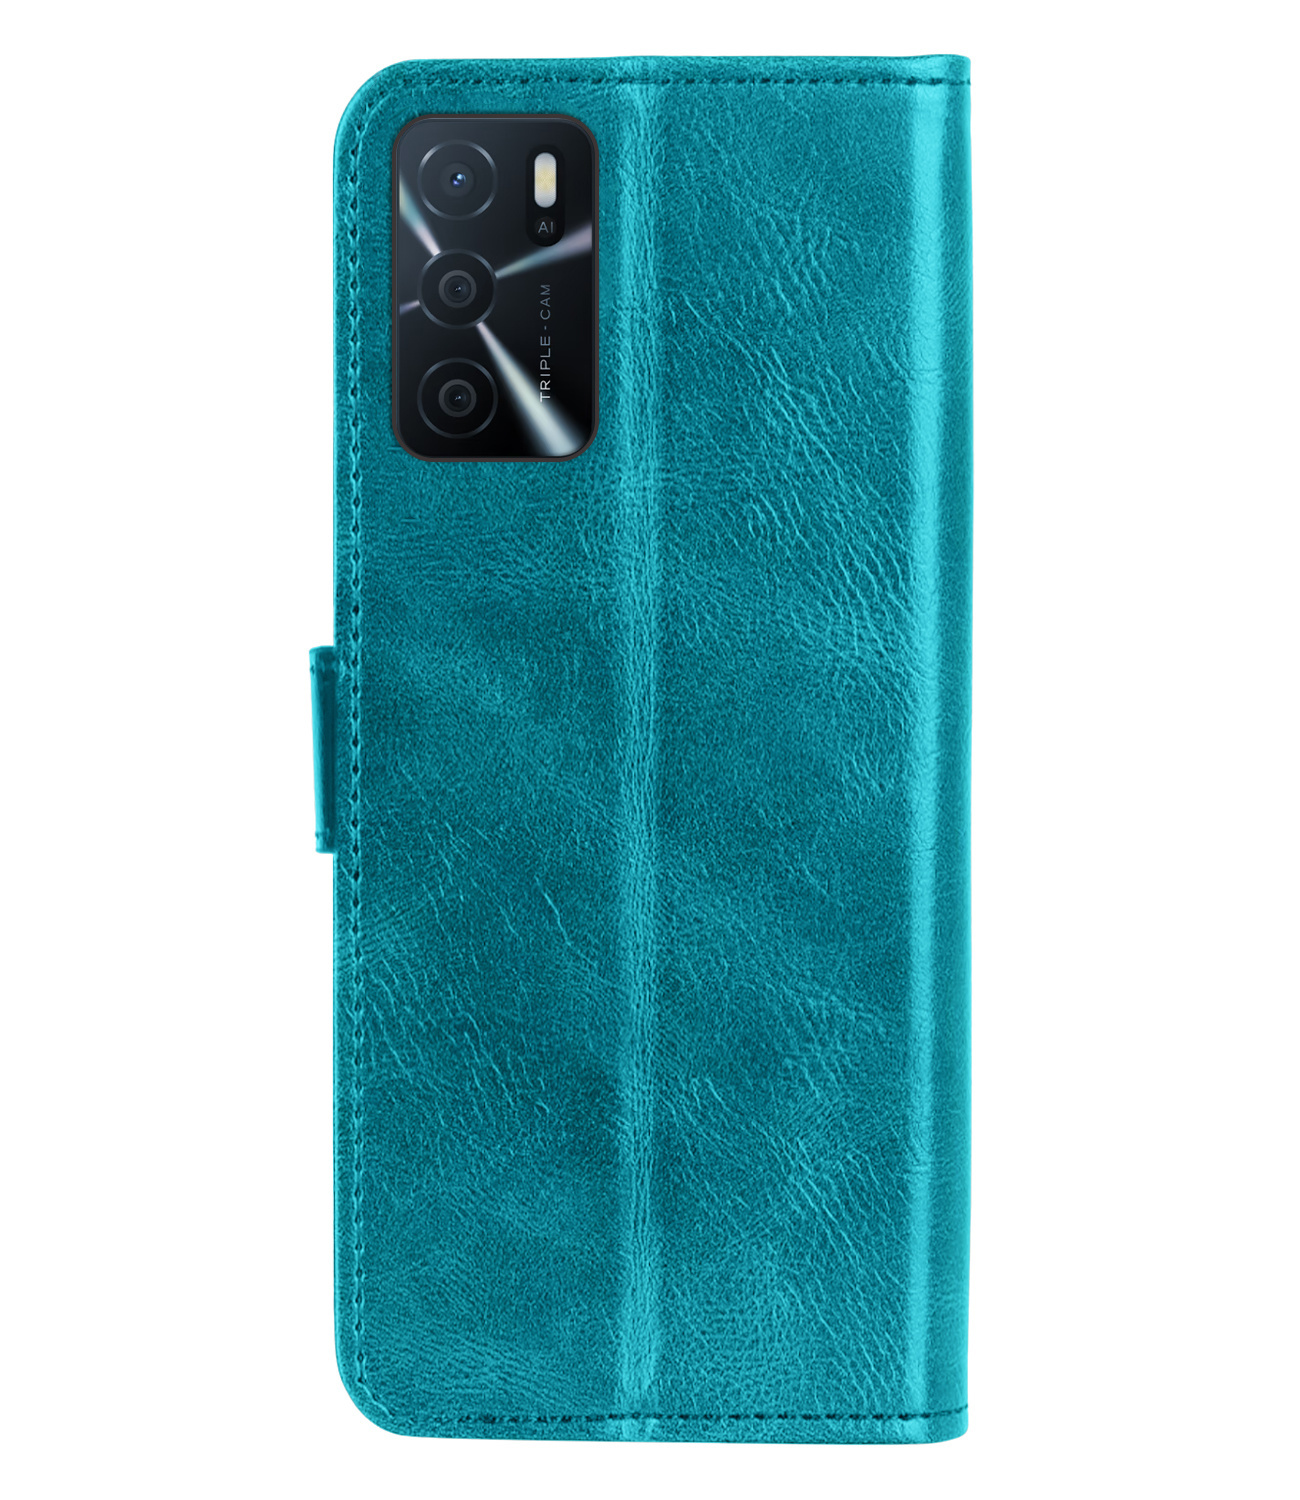 OPPO A16 Hoesje Bookcase Met 2x Screenprotector - OPPO A16 Screenprotector 2x - OPPO A16 Book Case Met 2x Screenprotector Turquoise